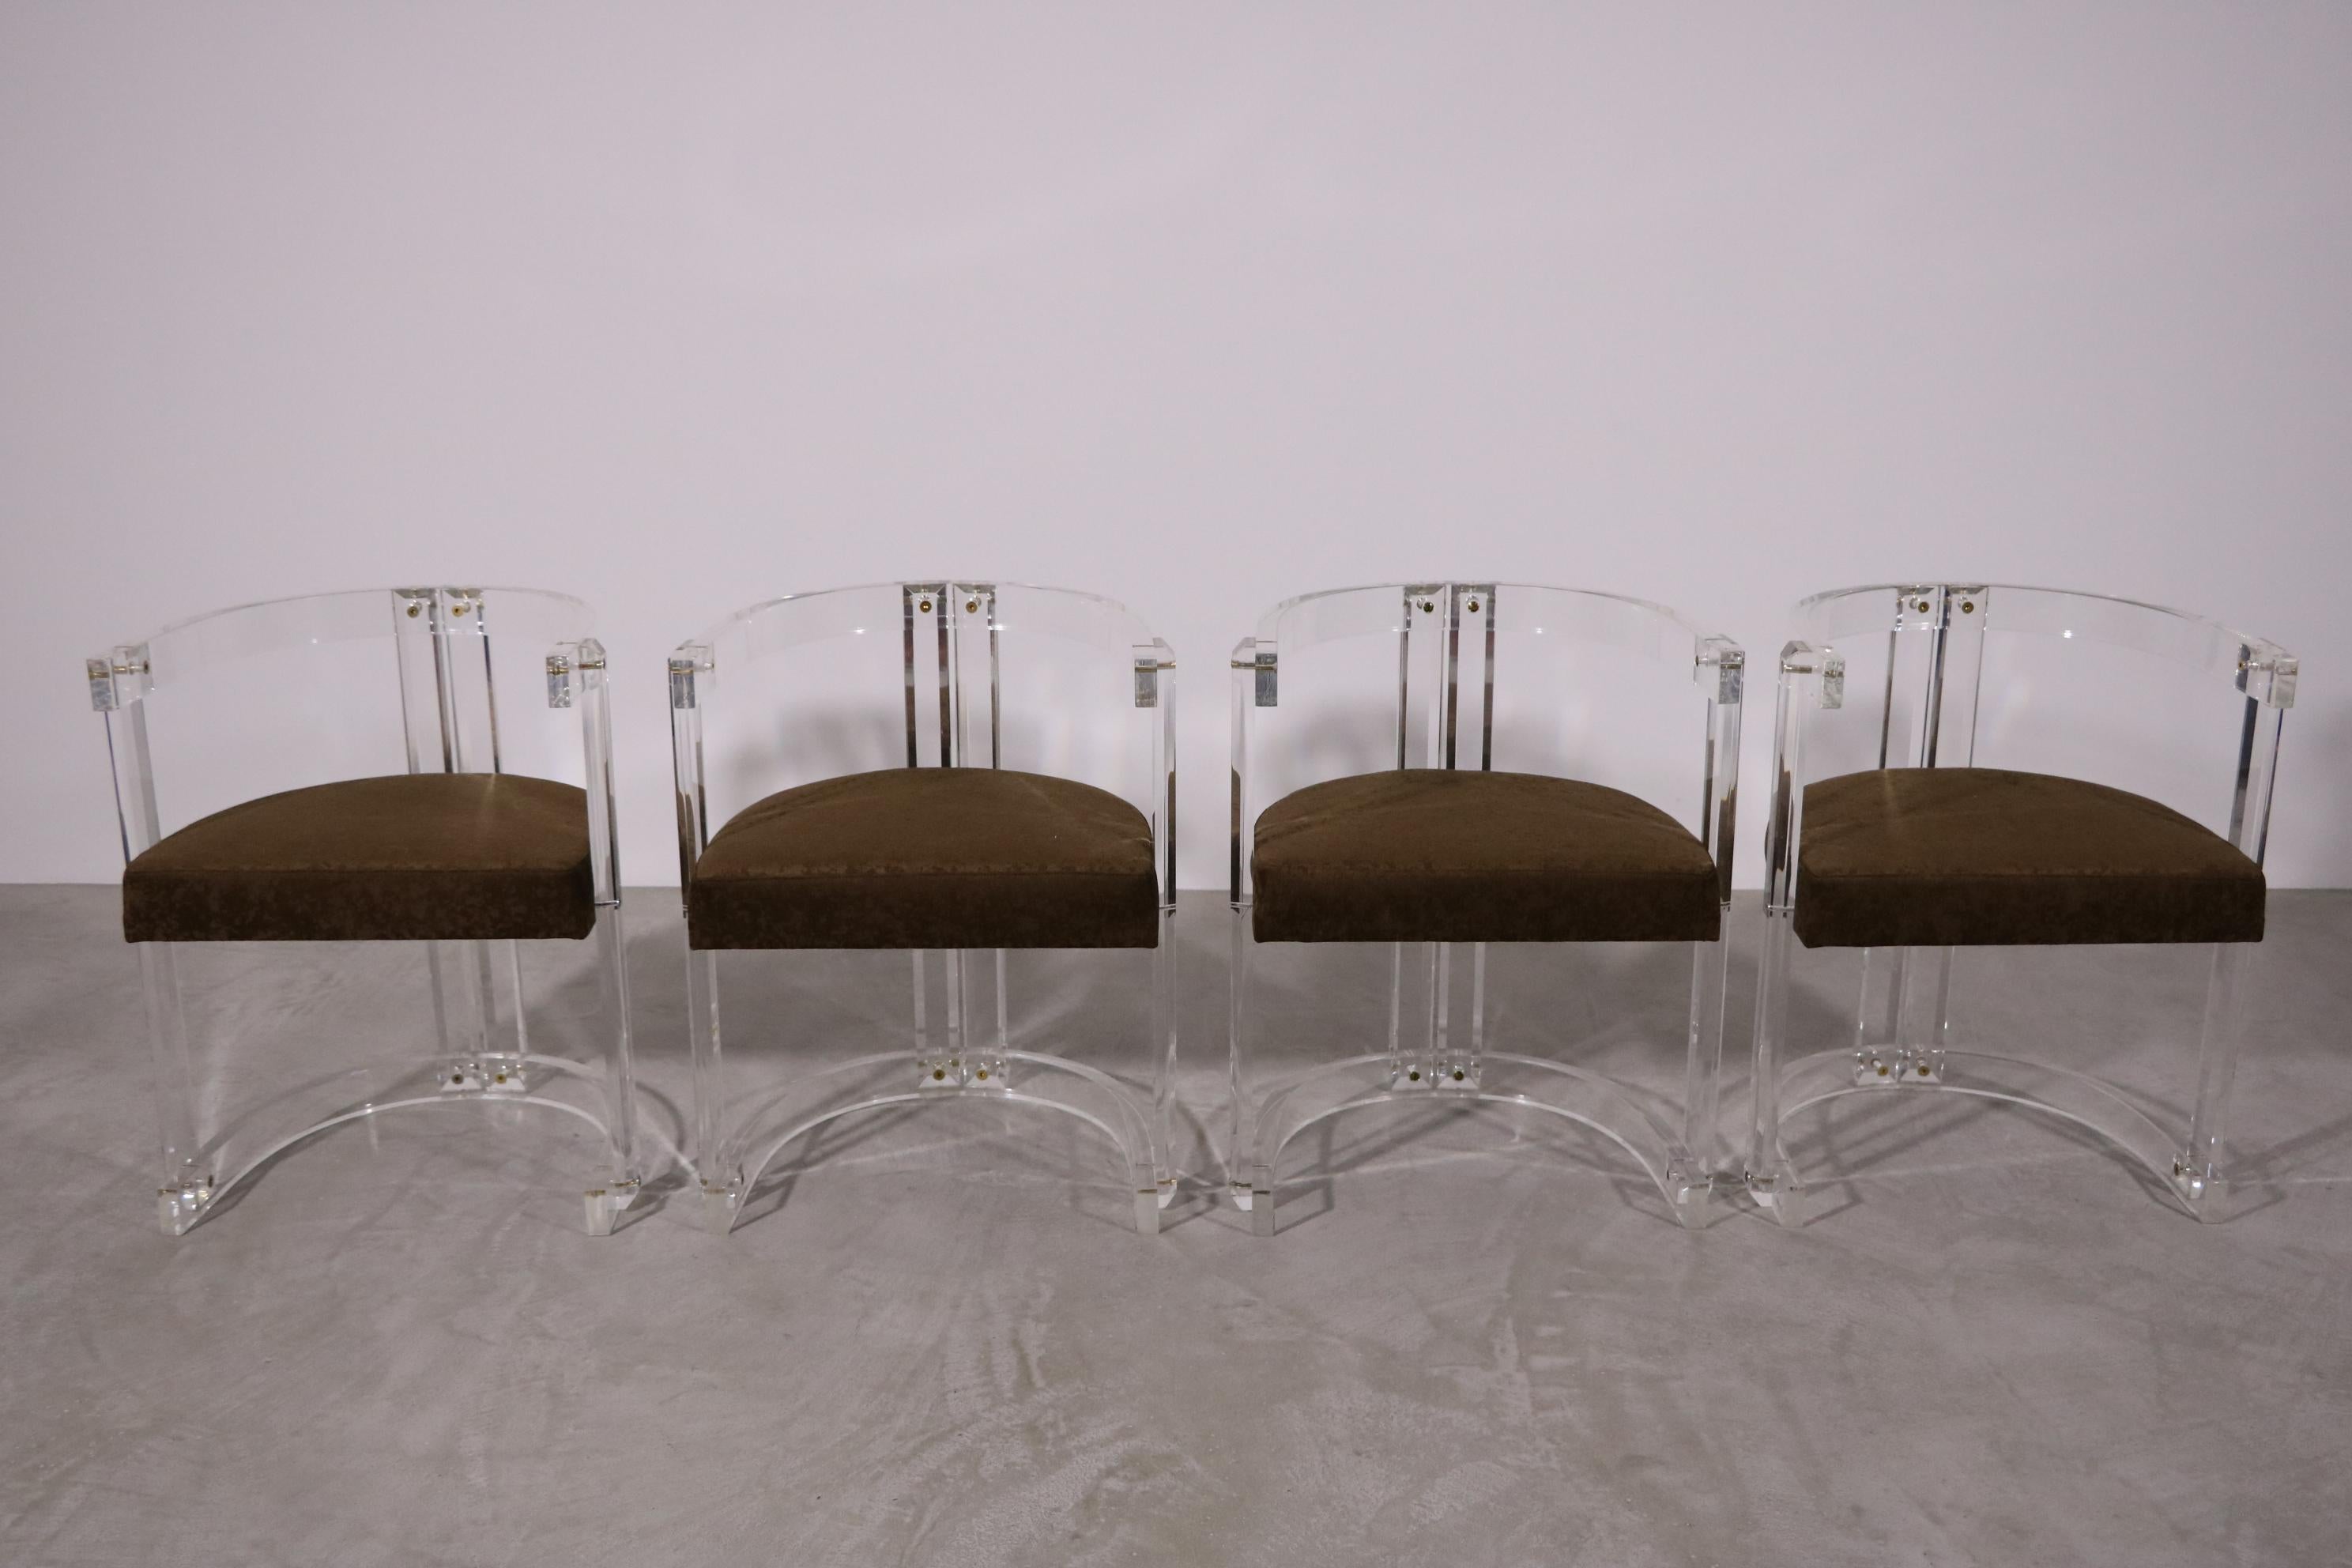 A beautiful set of 4 lucite dining chairs, exemplary and typical of the so-called Hollowood Regency style, created in the 1920-1950s, as a product of the Hollywood golden age, a period particularly known for its very own and special elegance and